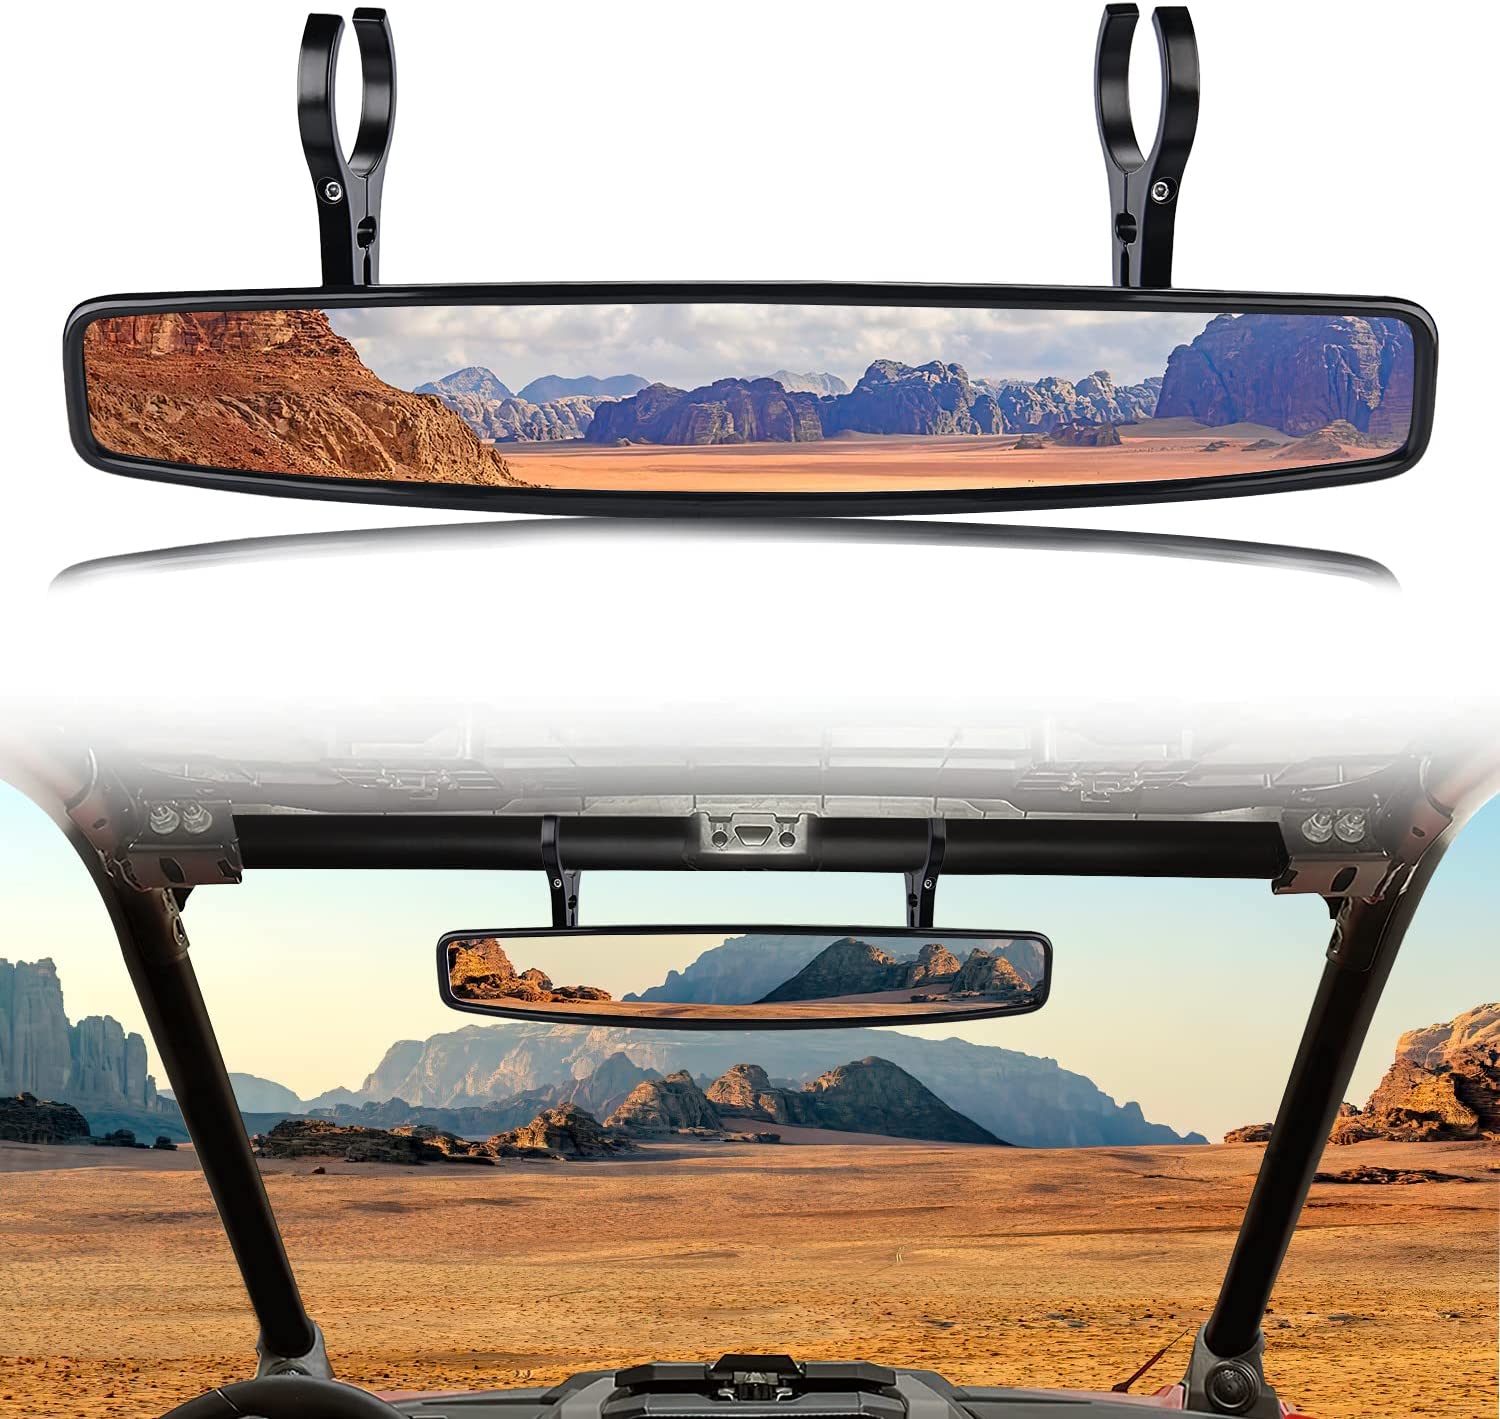 UTV Rear View Mirror 15" Wide Clear Powersports UTV Mirror with 3/4 1.75" or 2" Clamps and Convex Design Compatible with Polaris RZR PRO XP, Can Am Commander Maverick, Pioneer, Kawasaki Mule